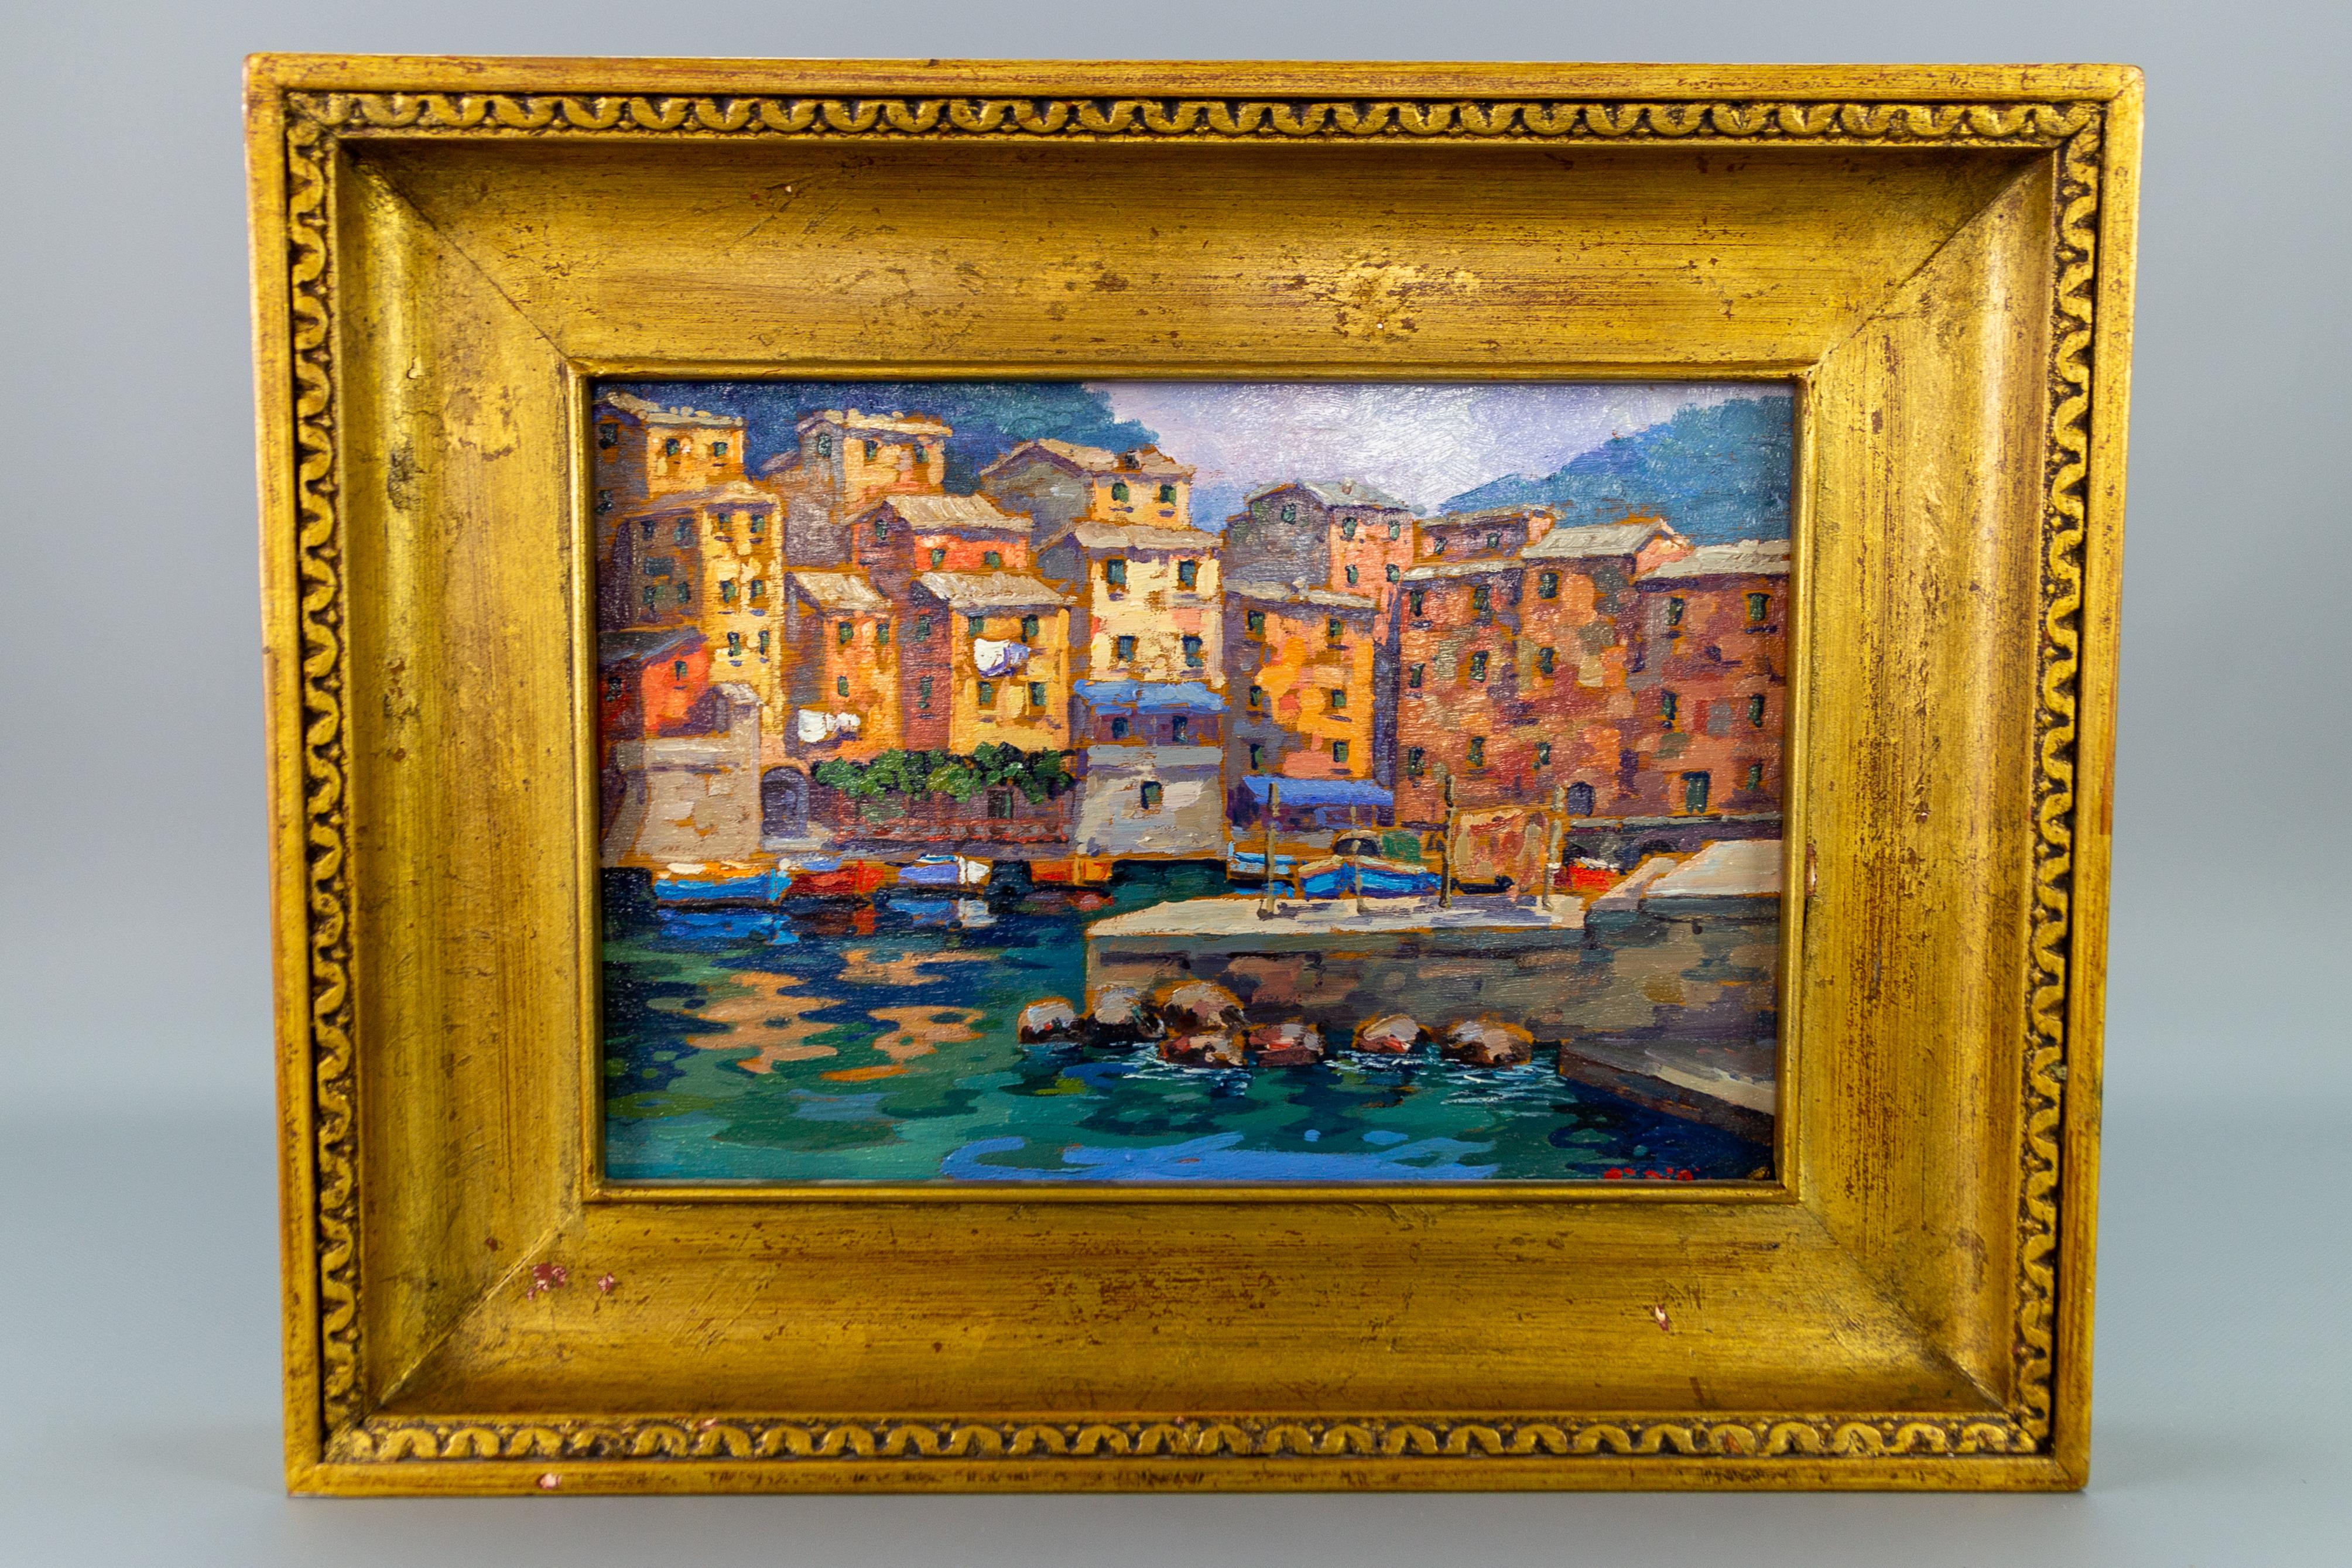 Beautiful and colorful Italian landscape port view painting, oil on panel, signed Maria Teresa Di Micco (* 1941). Wooden frame.
Dimensions with frame: height: 32 cm / 12.59 in; width: 41 cm / 16.14 in; depth: 6.5 cm / 2.55 in.
Dimensions unframed: